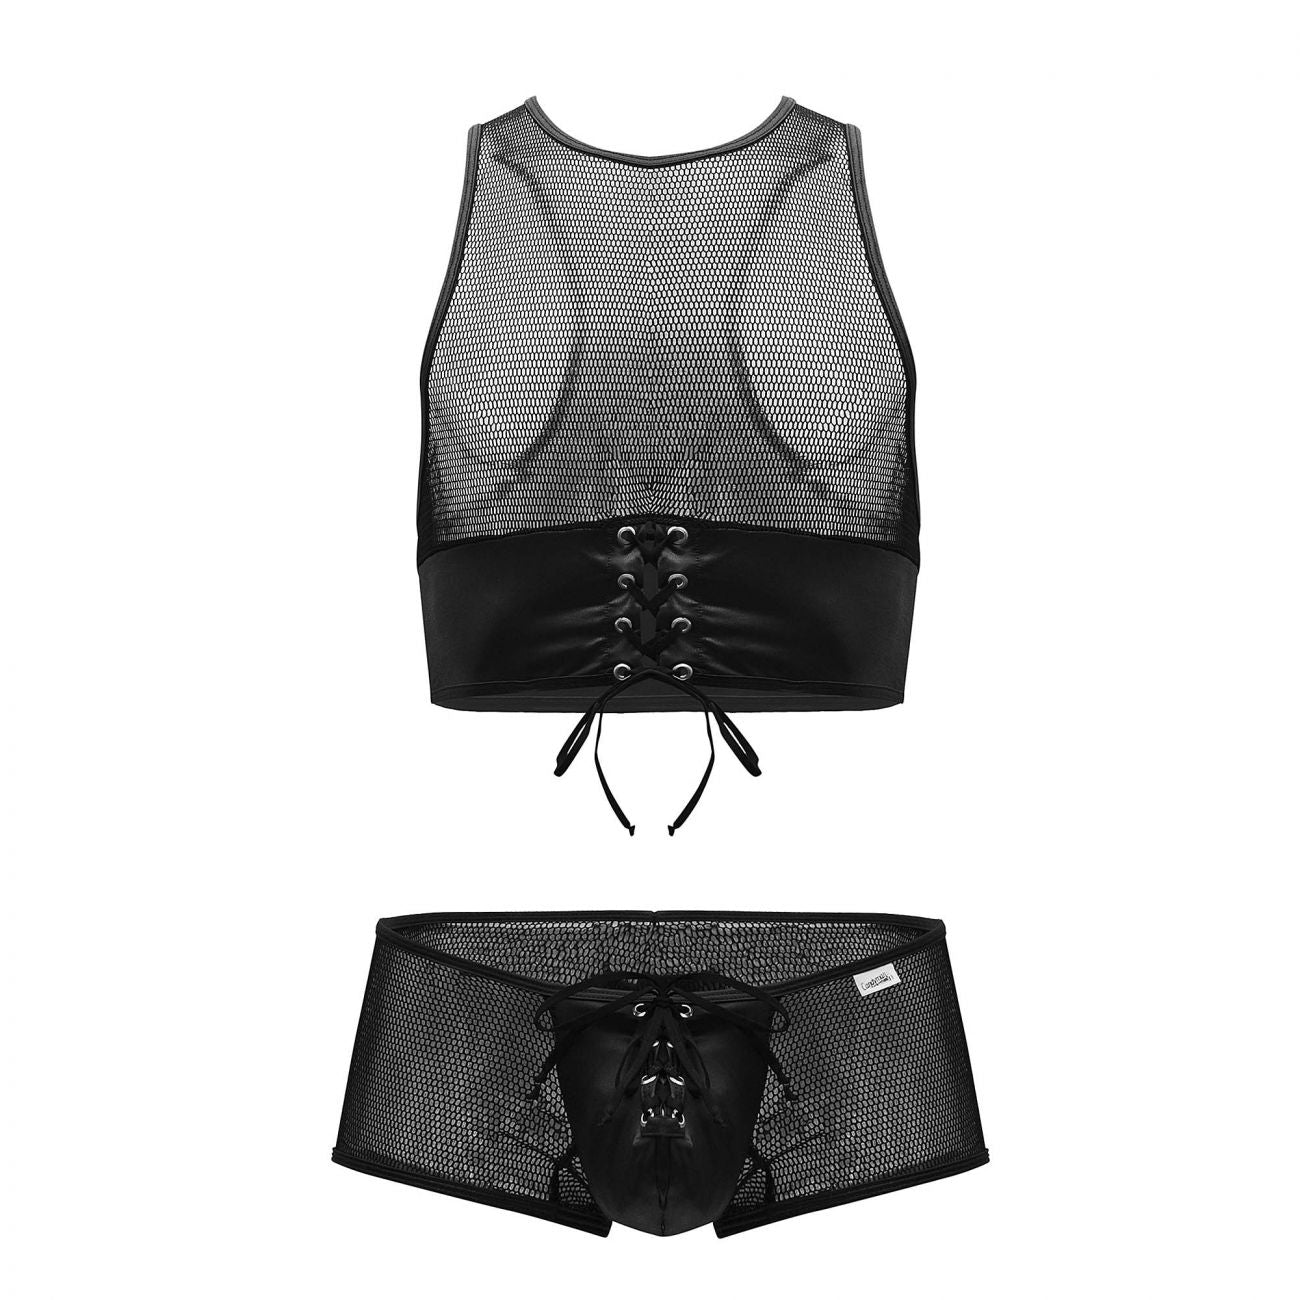 CandyMan Mesh Top-Trunks Outfit